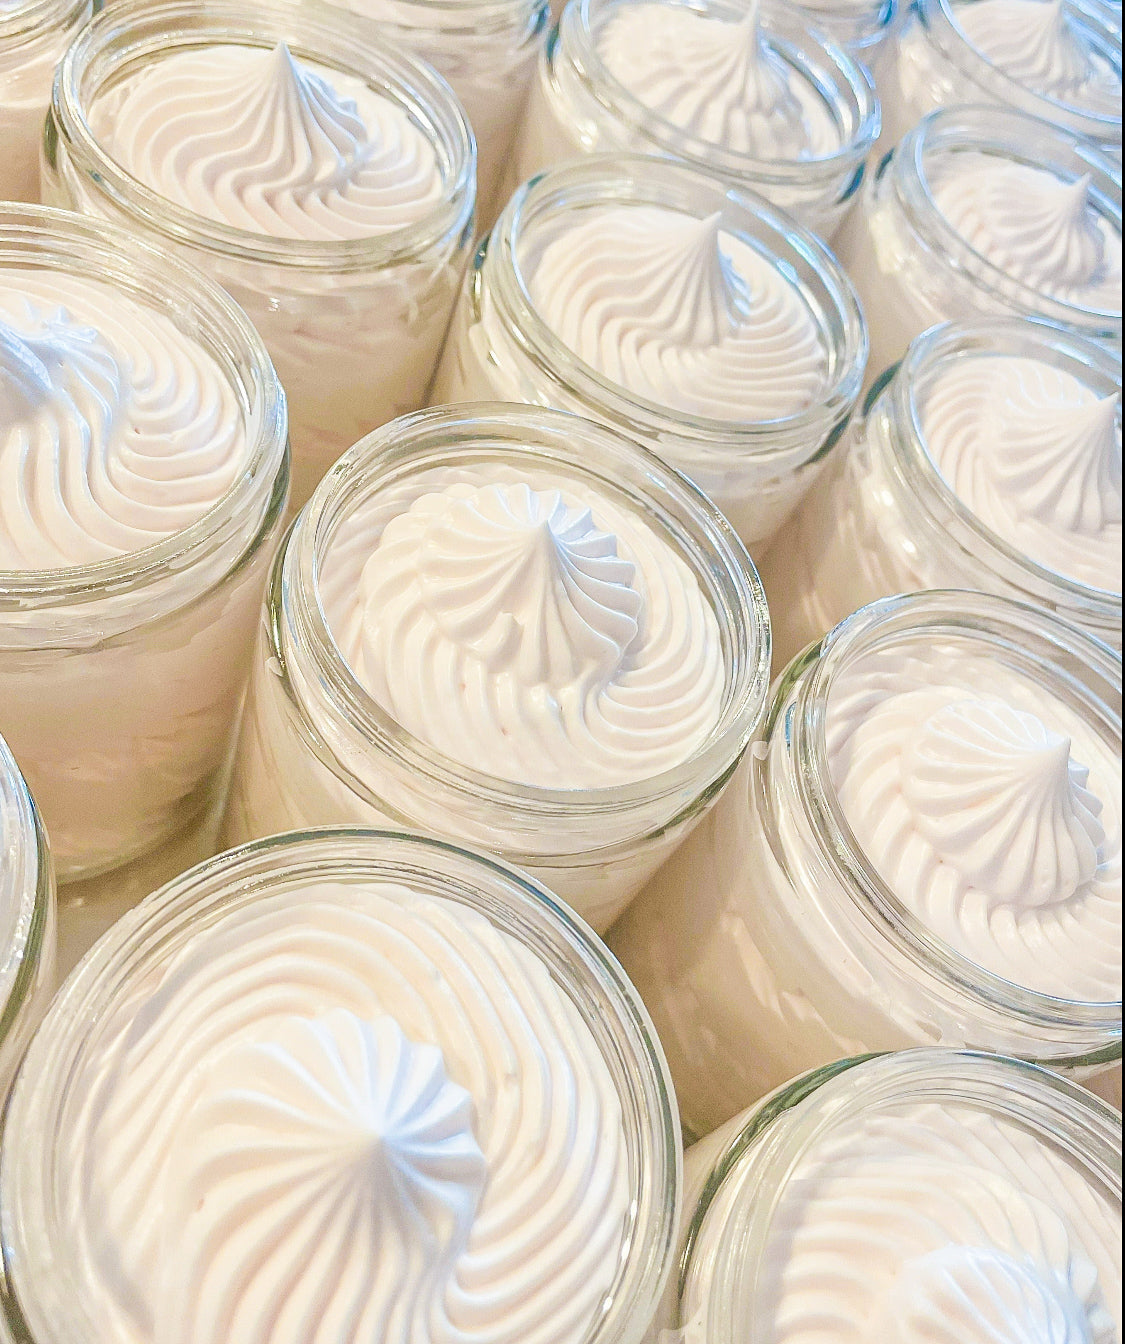 Whipped Triple Body Butter (several scent options)